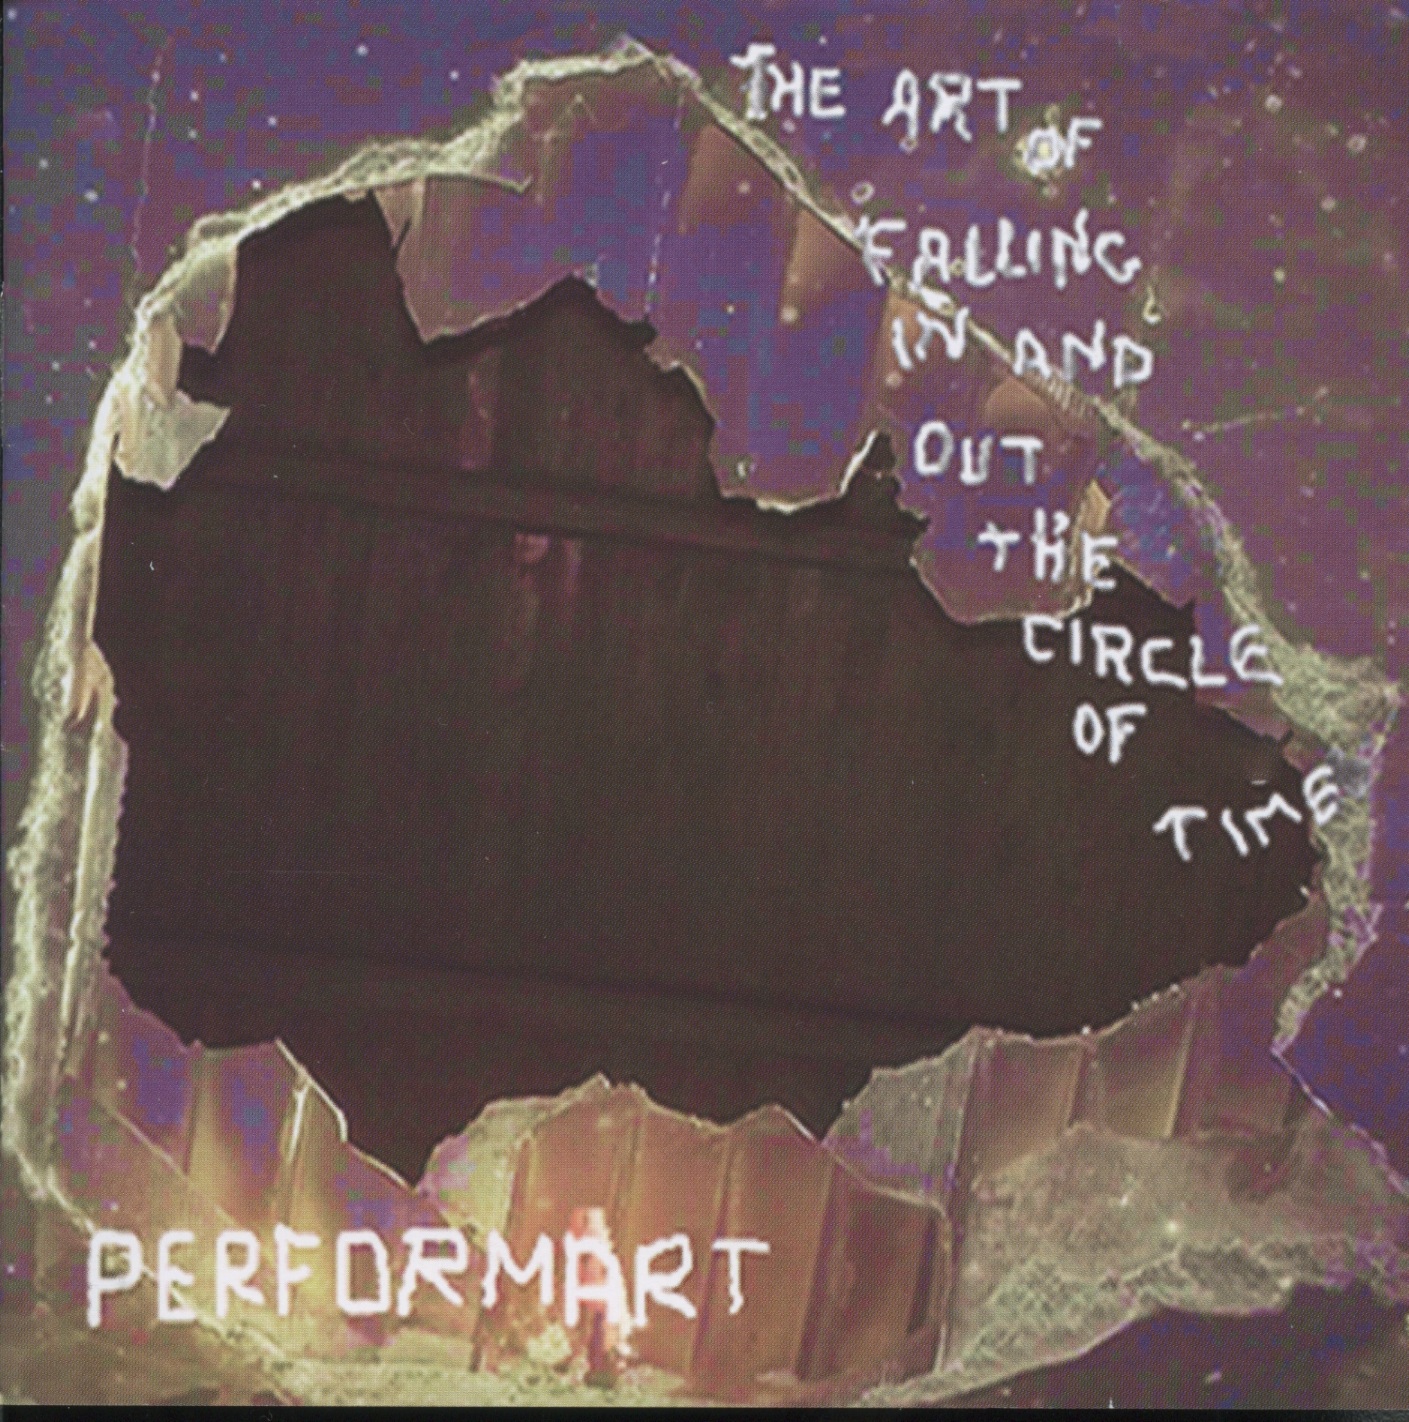 PERFORMART “THE ART OF FALLING IN AND OUT THE CIRCLE OF TIME” (C